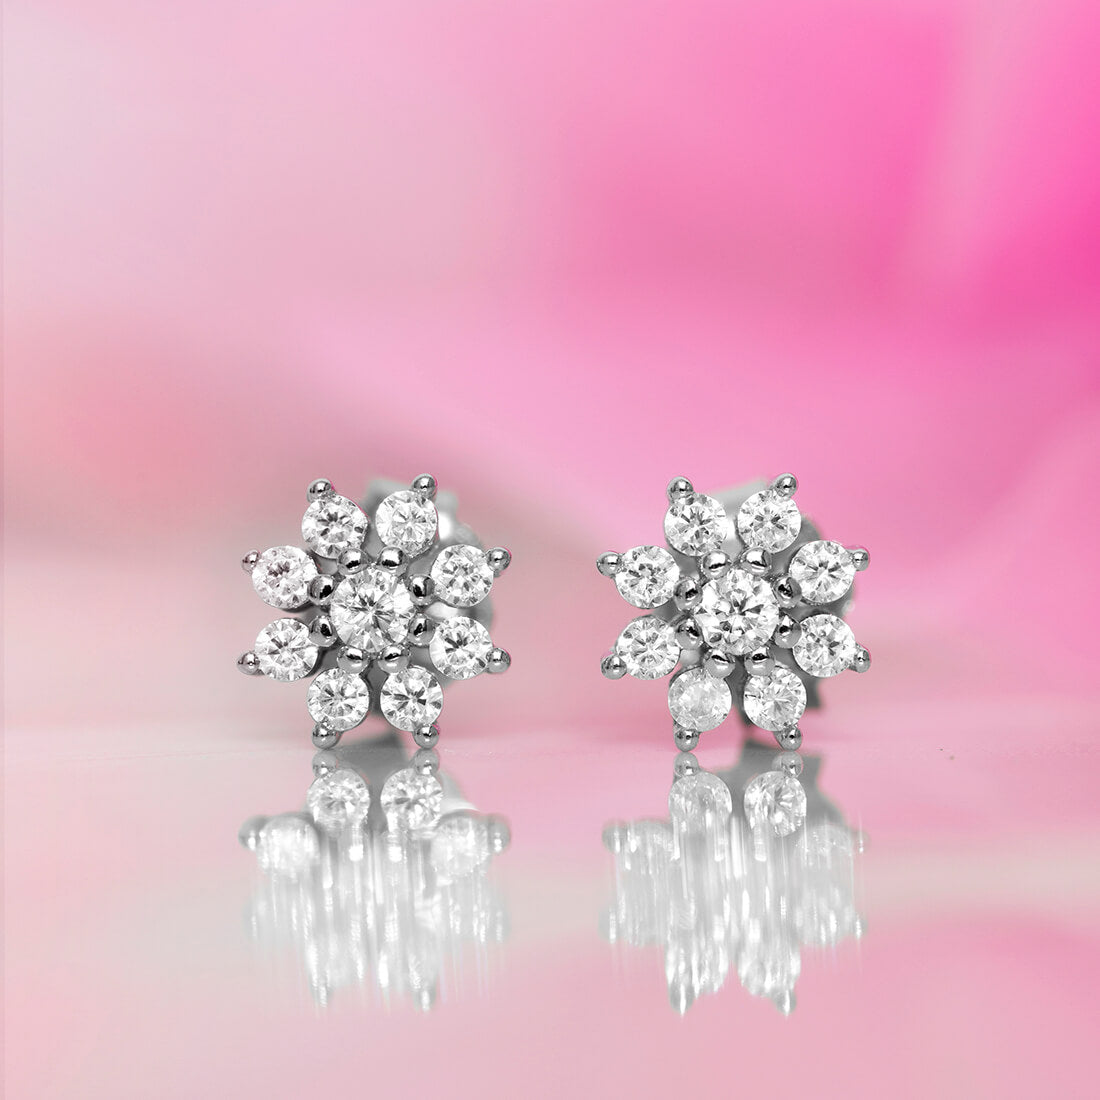 Stellar Nakshatra Floral Silver Earrings - Valentines Edition With Gift Box